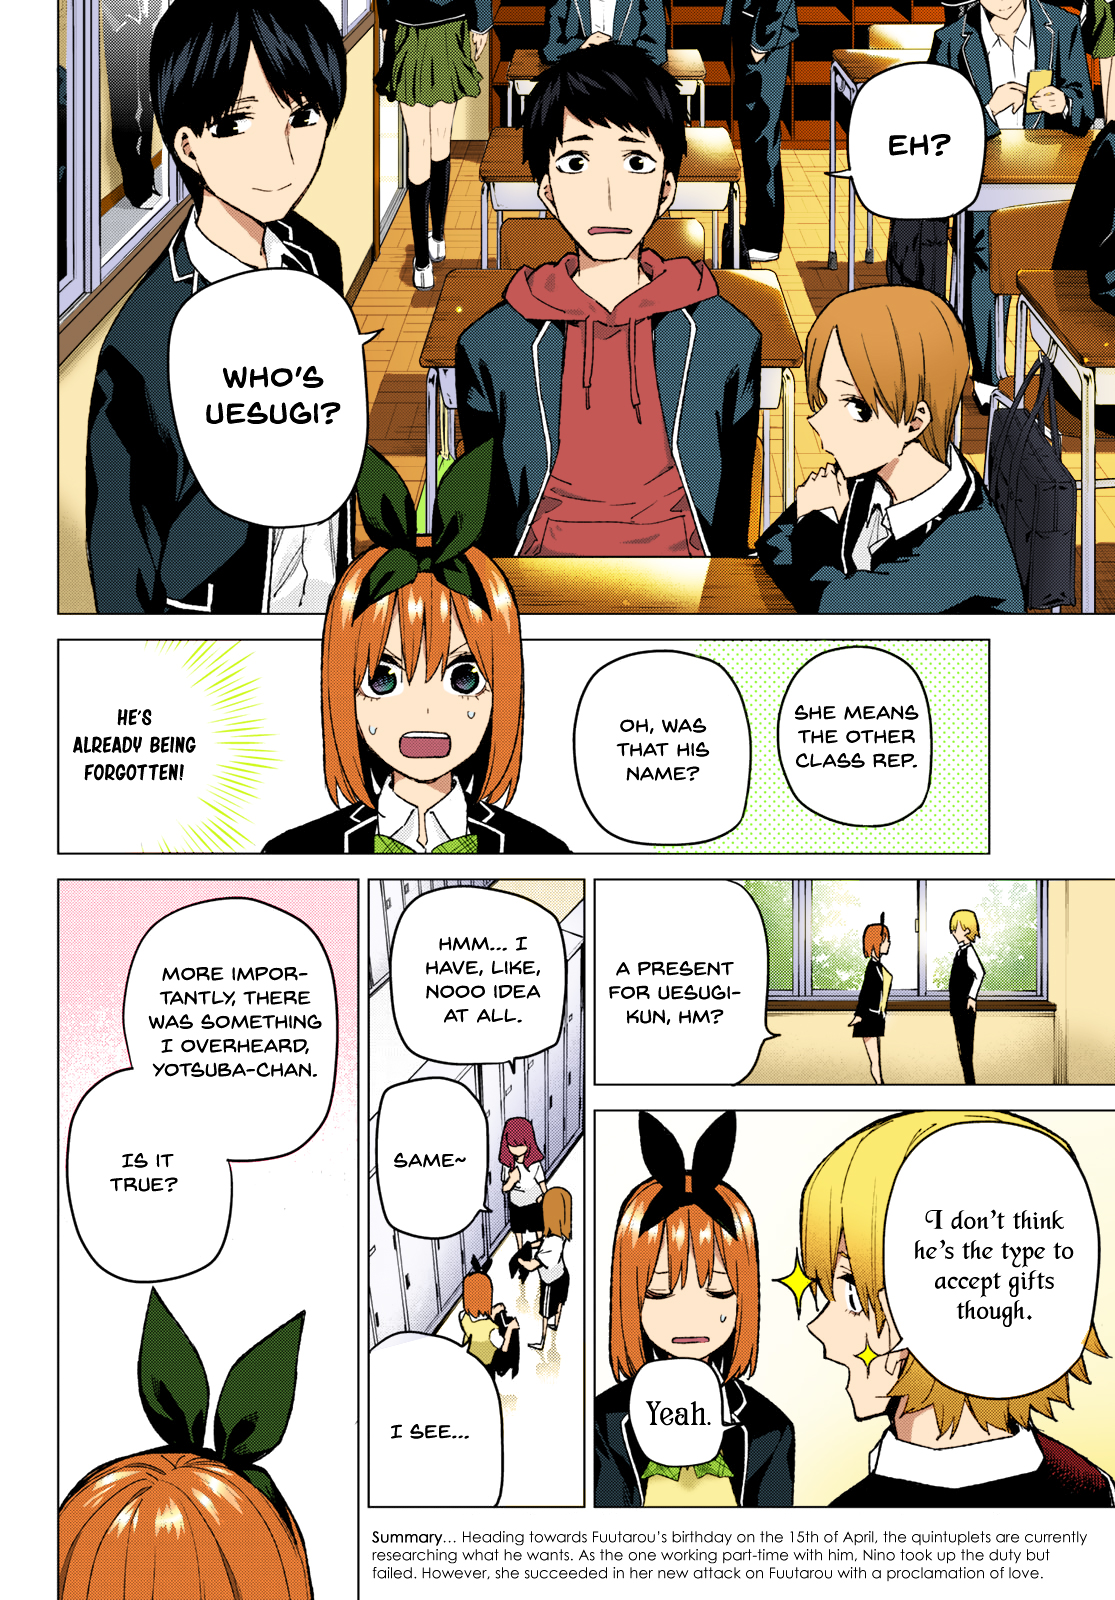 5Toubun no Hanayome (Fan Colored) Ch. 72 The Rumour About the Class Reps